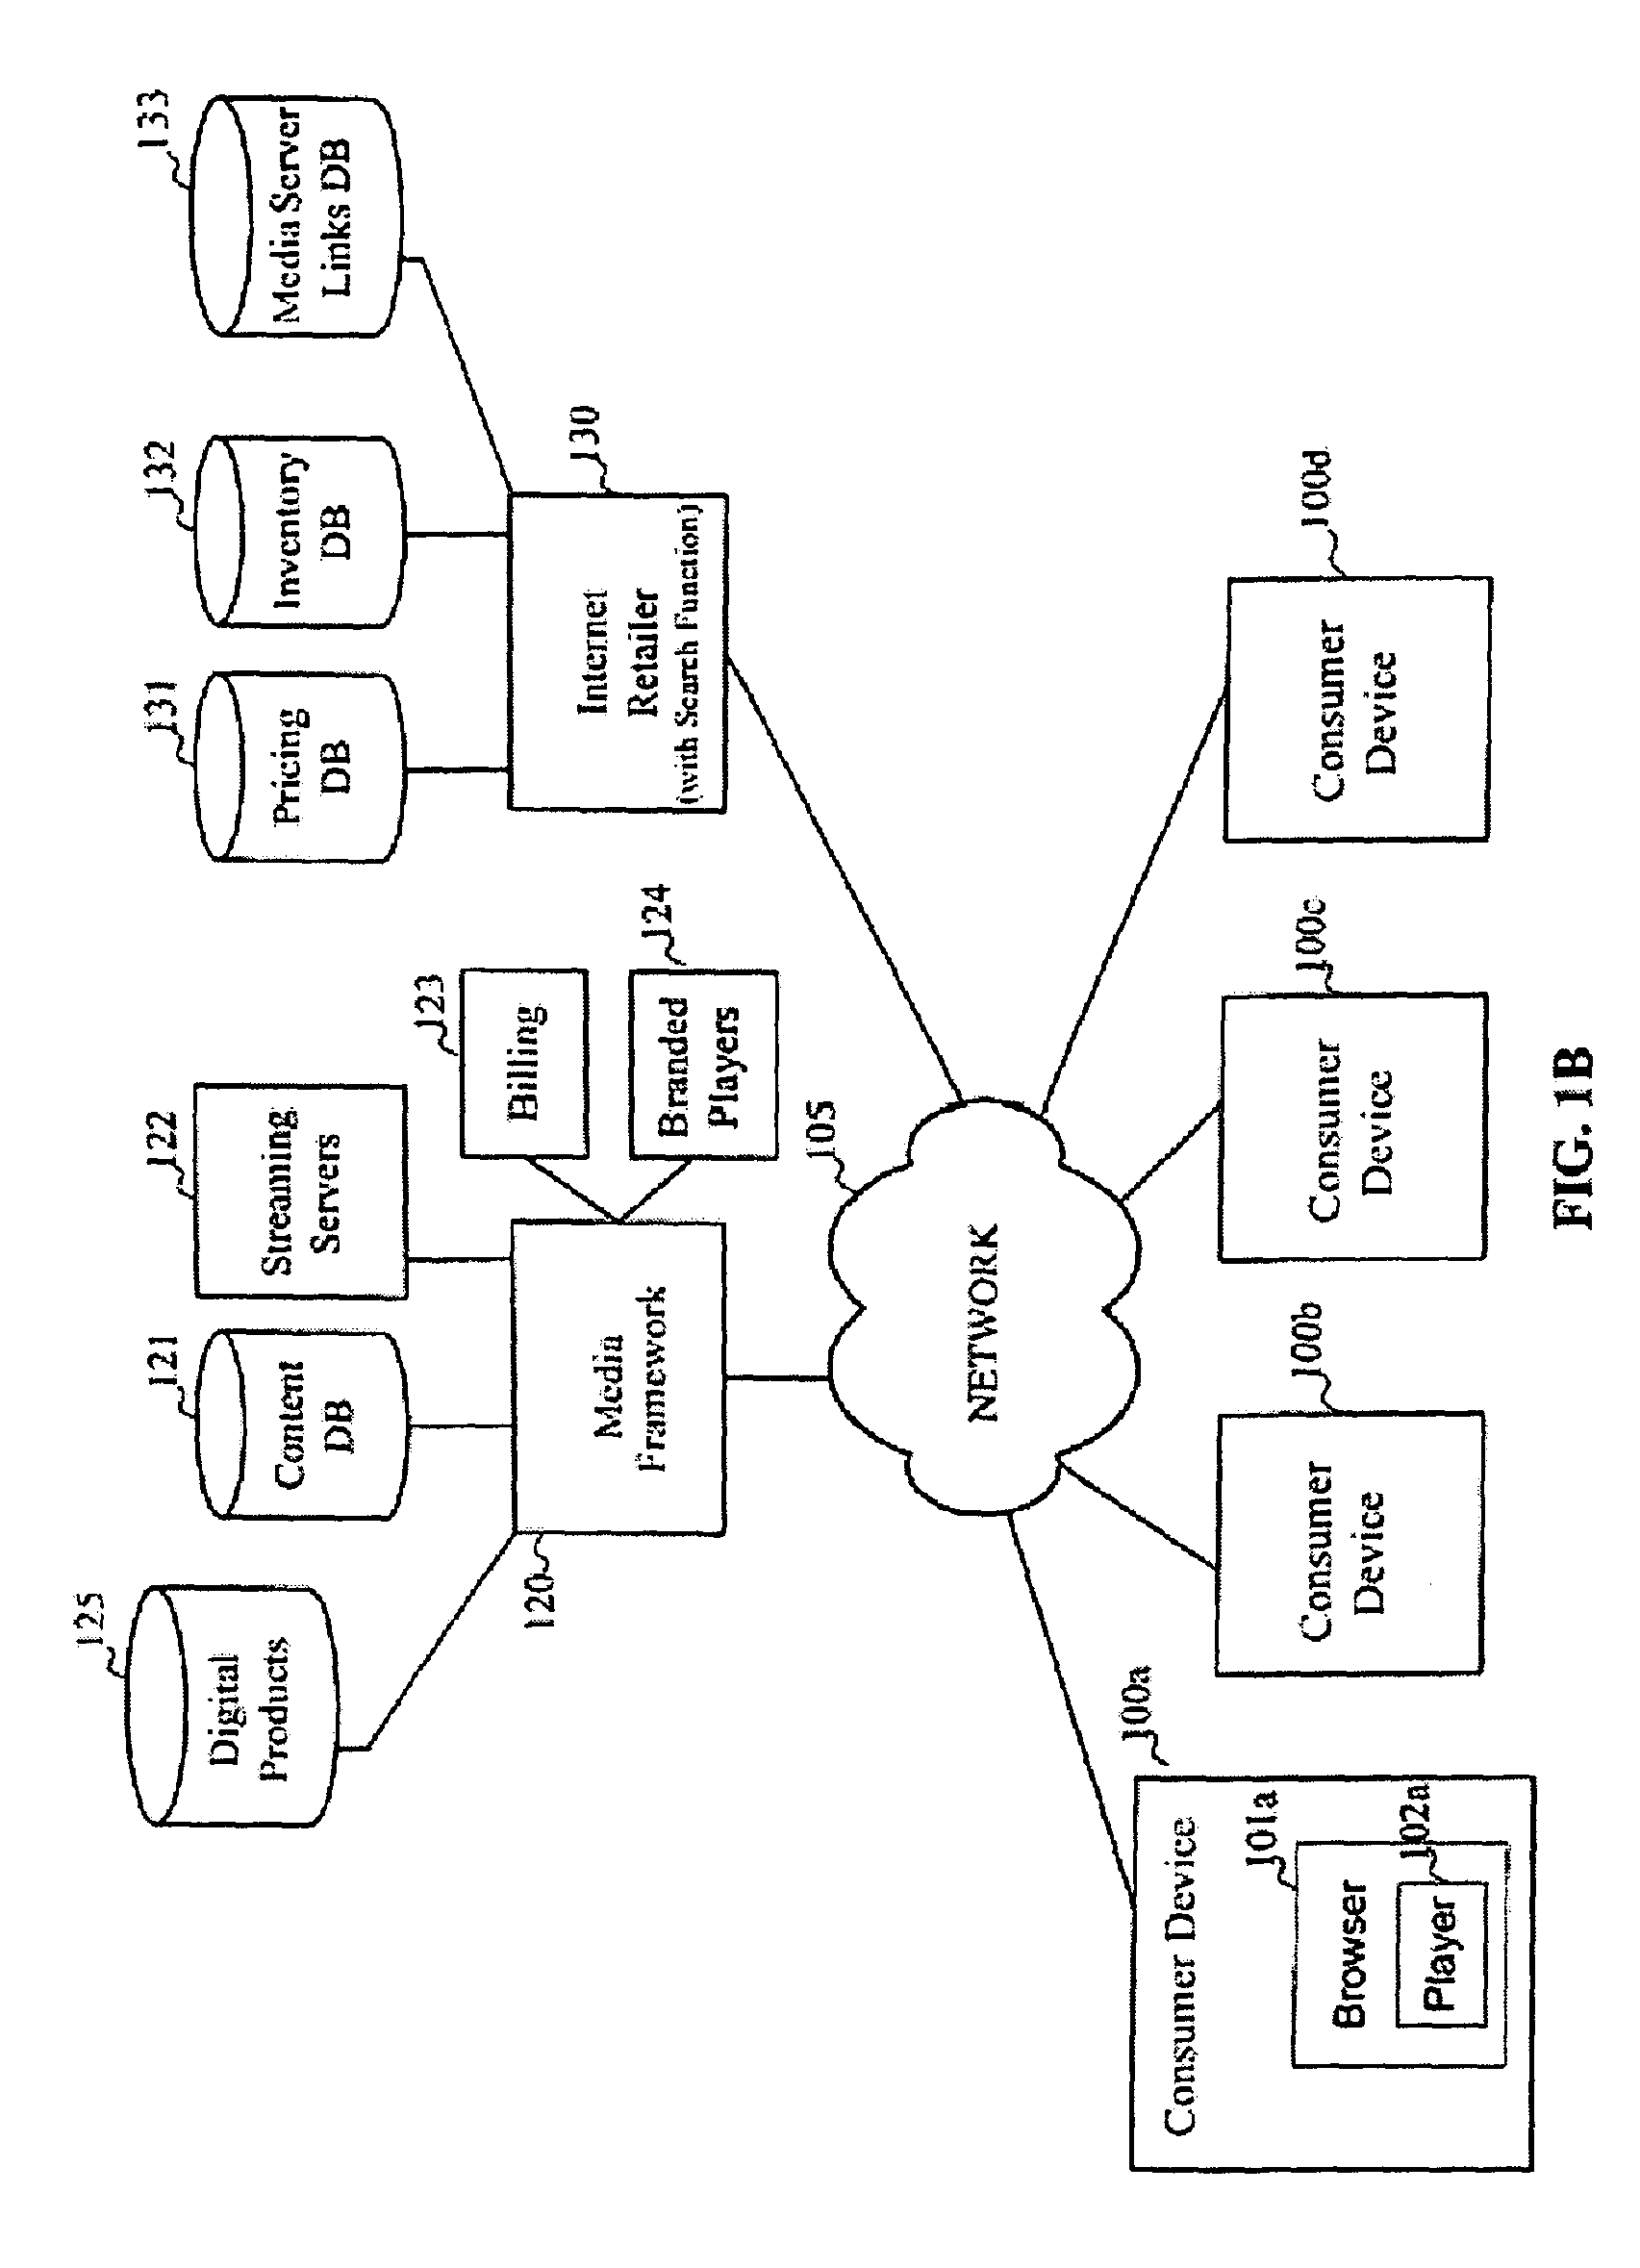 System and method for providing media samples on-line in response to media related searches on the internet